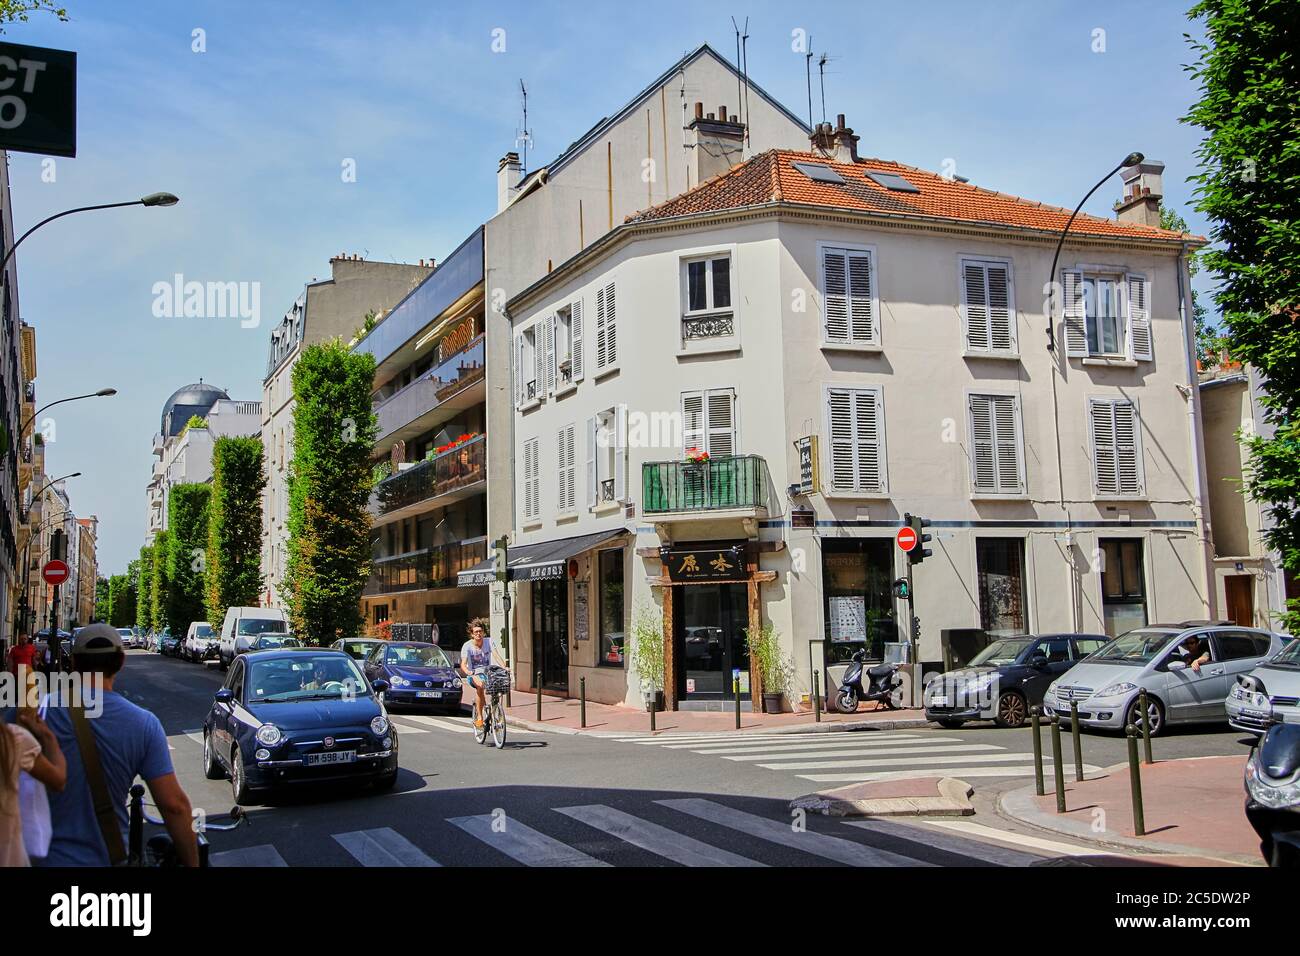 Levallois-Perret, France - June 28, 2015: Intersection of Rue Rivay and Rue Camille Pelletan. Facade of the building with a Japanese restaurant. Peopl Stock Photo